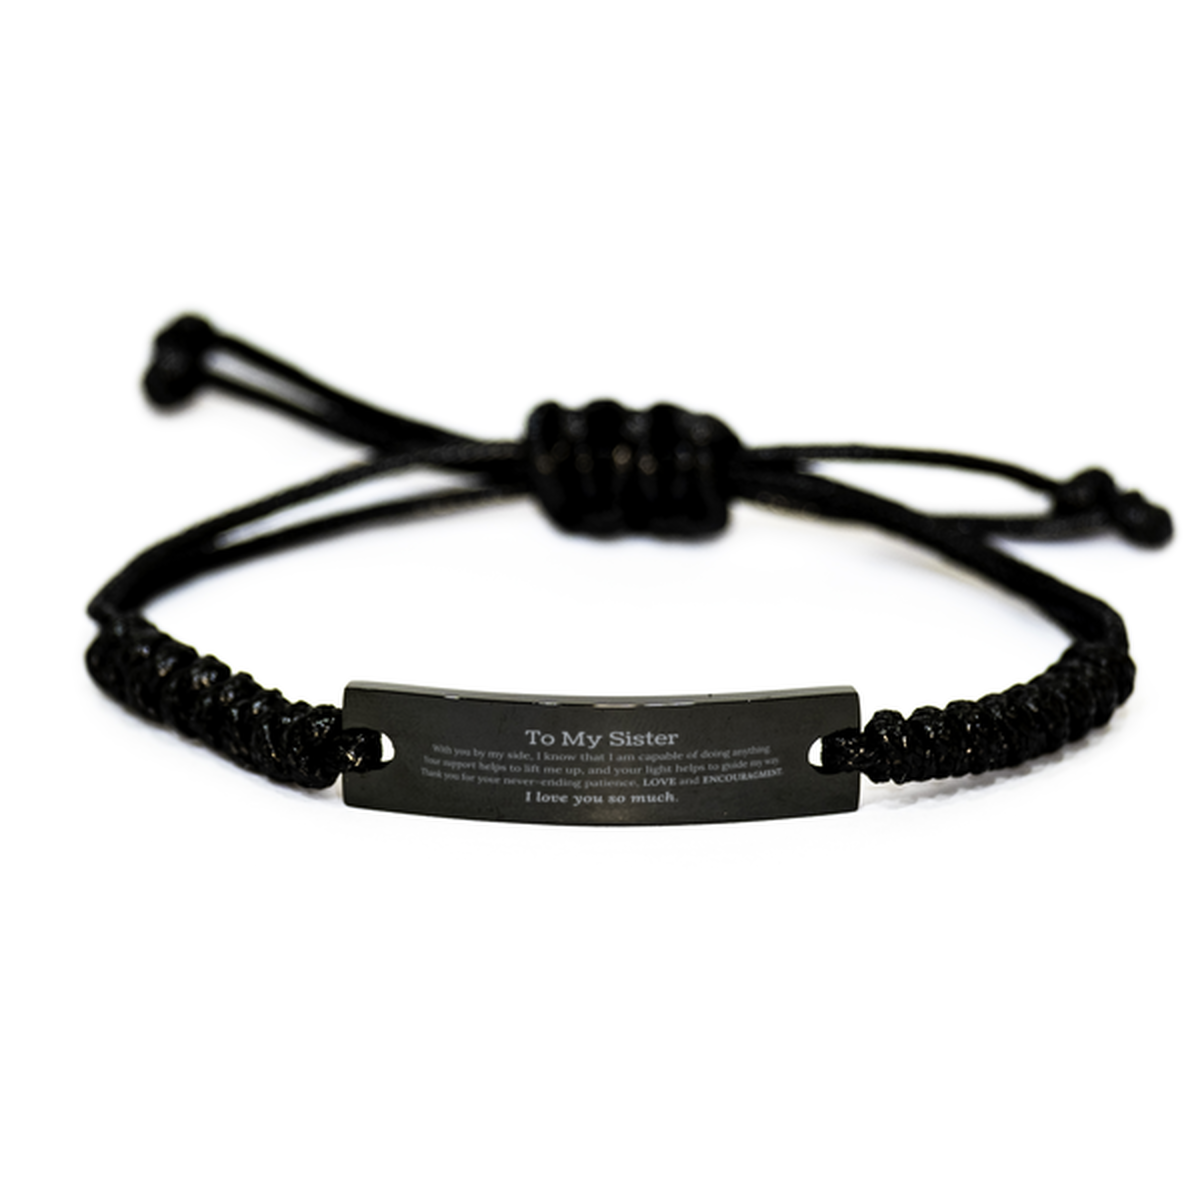 Appreciation Sister Black Rope Bracelet Gifts, To My Sister Birthday Christmas Wedding Keepsake Gifts for Sister With you by my side, I know that I am capable of doing anything. I love you so much